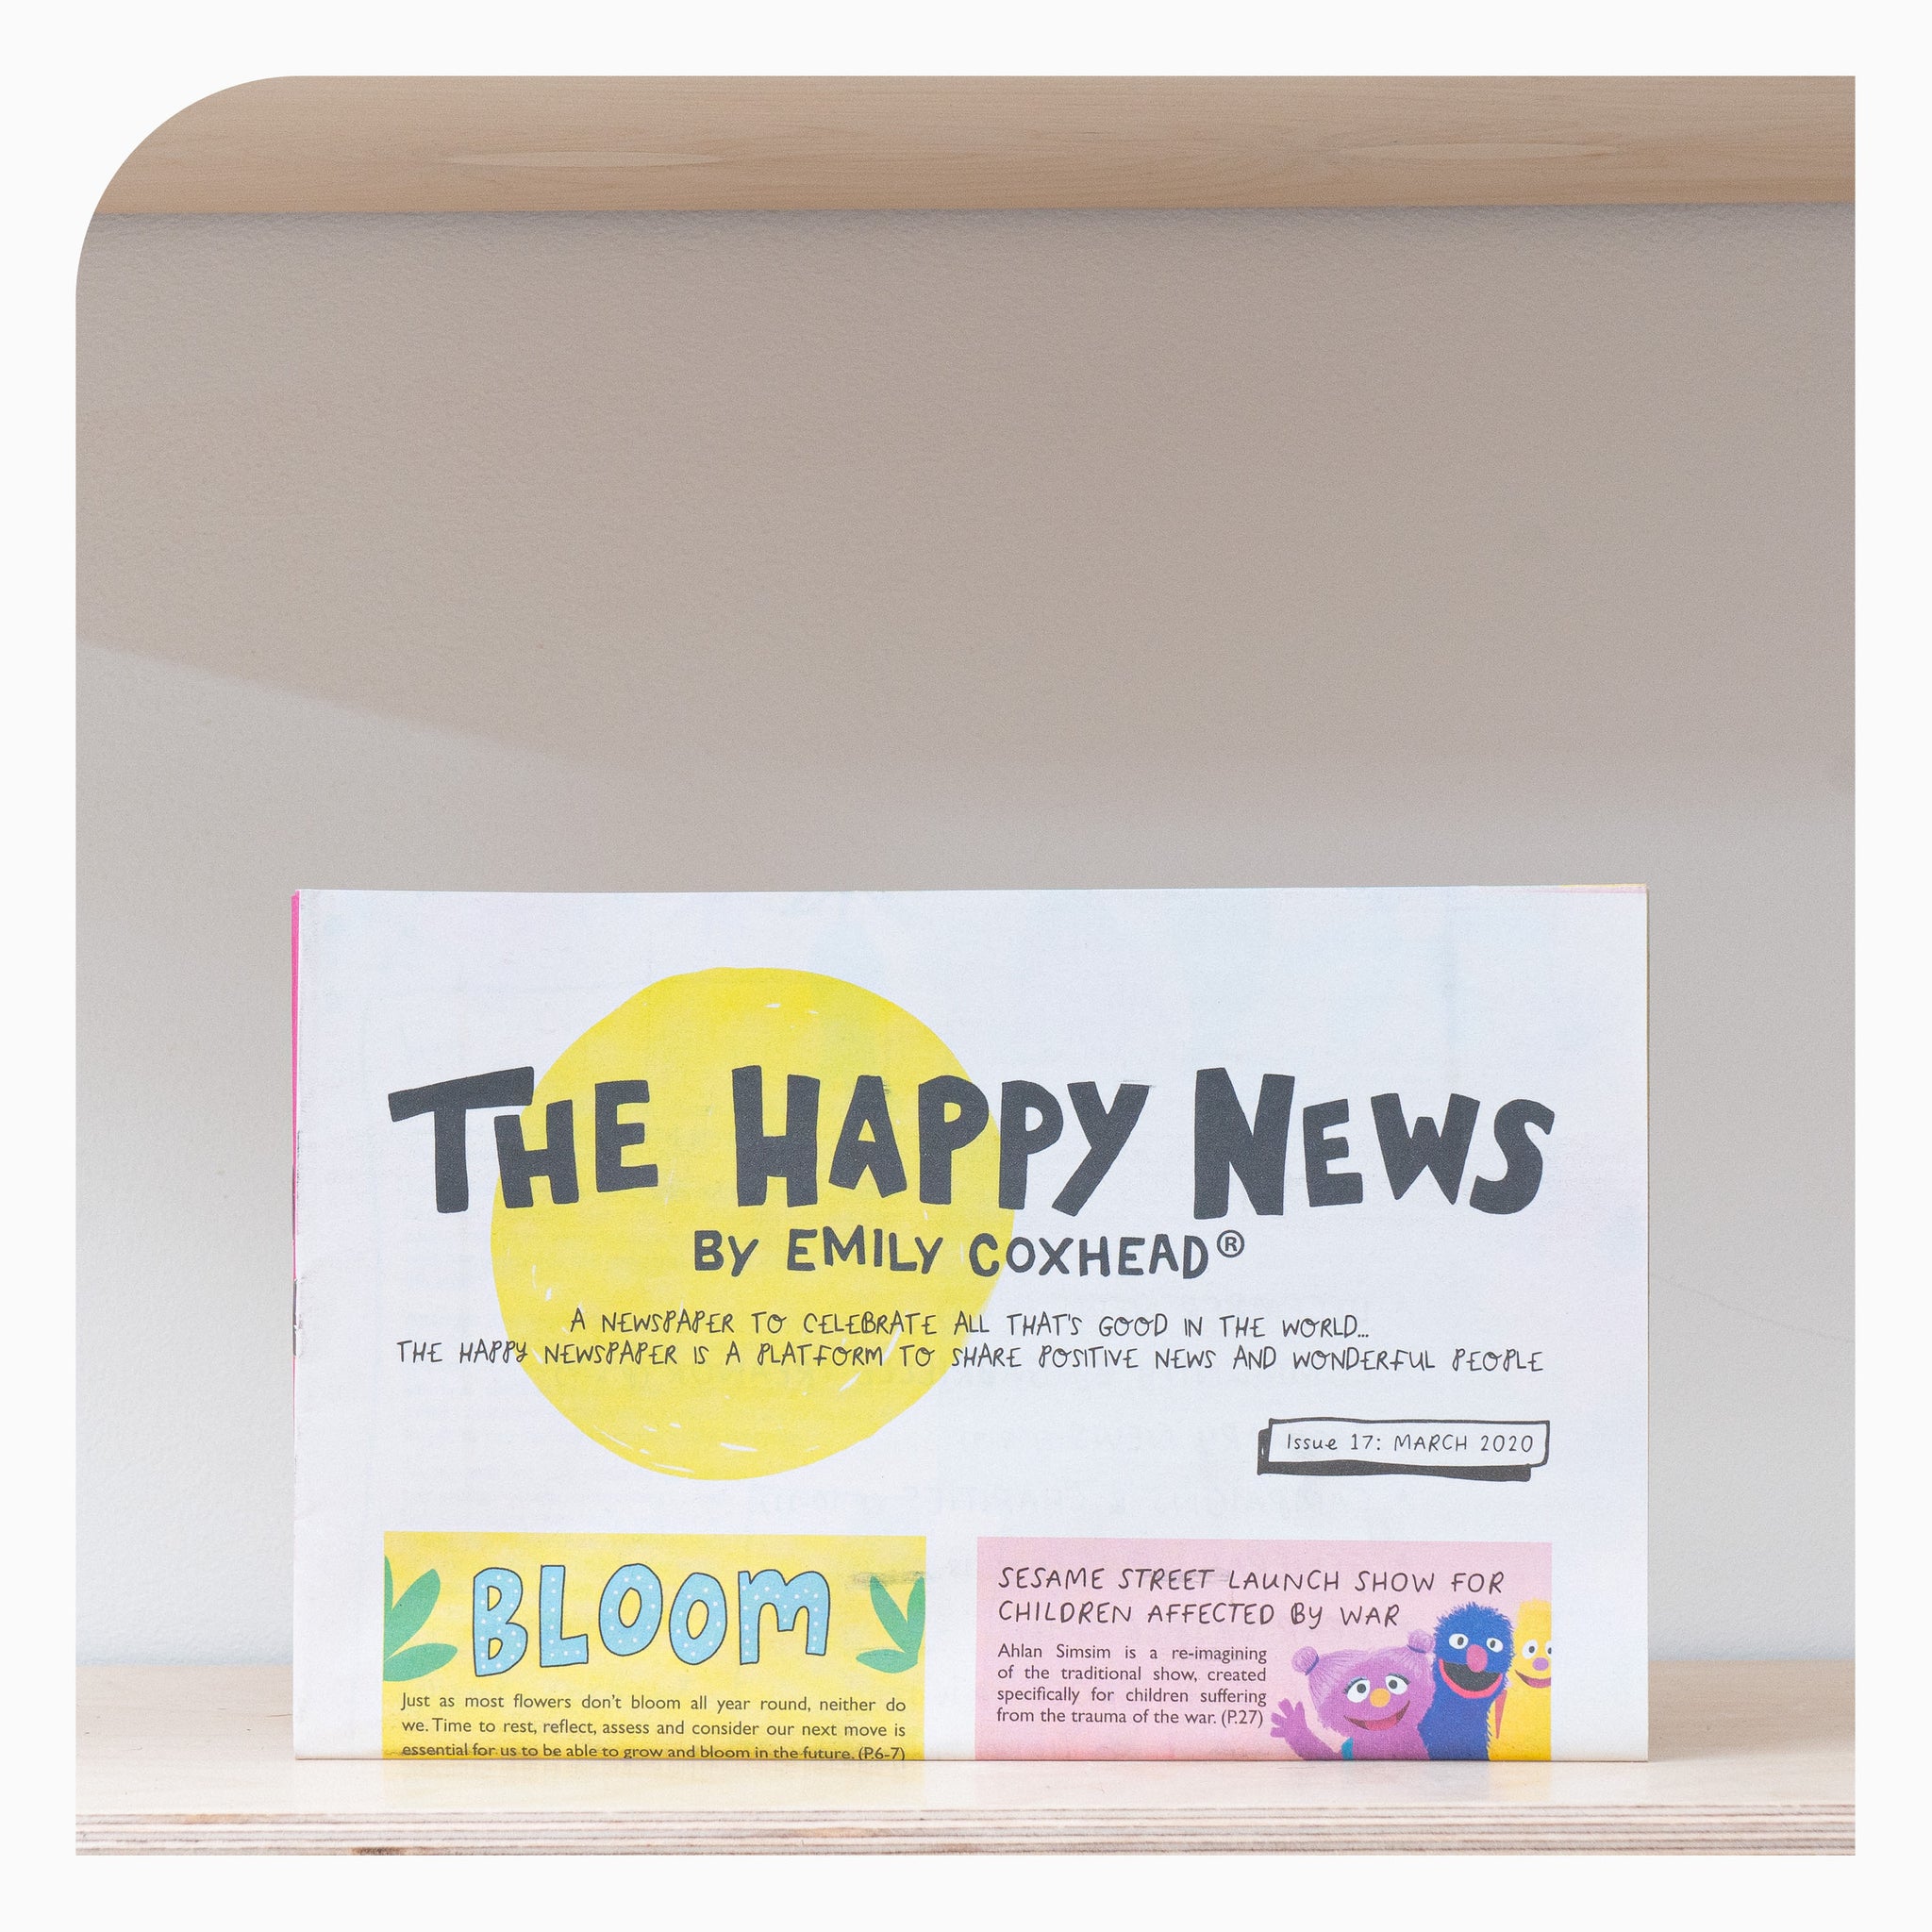 The Happy News - Issue 17